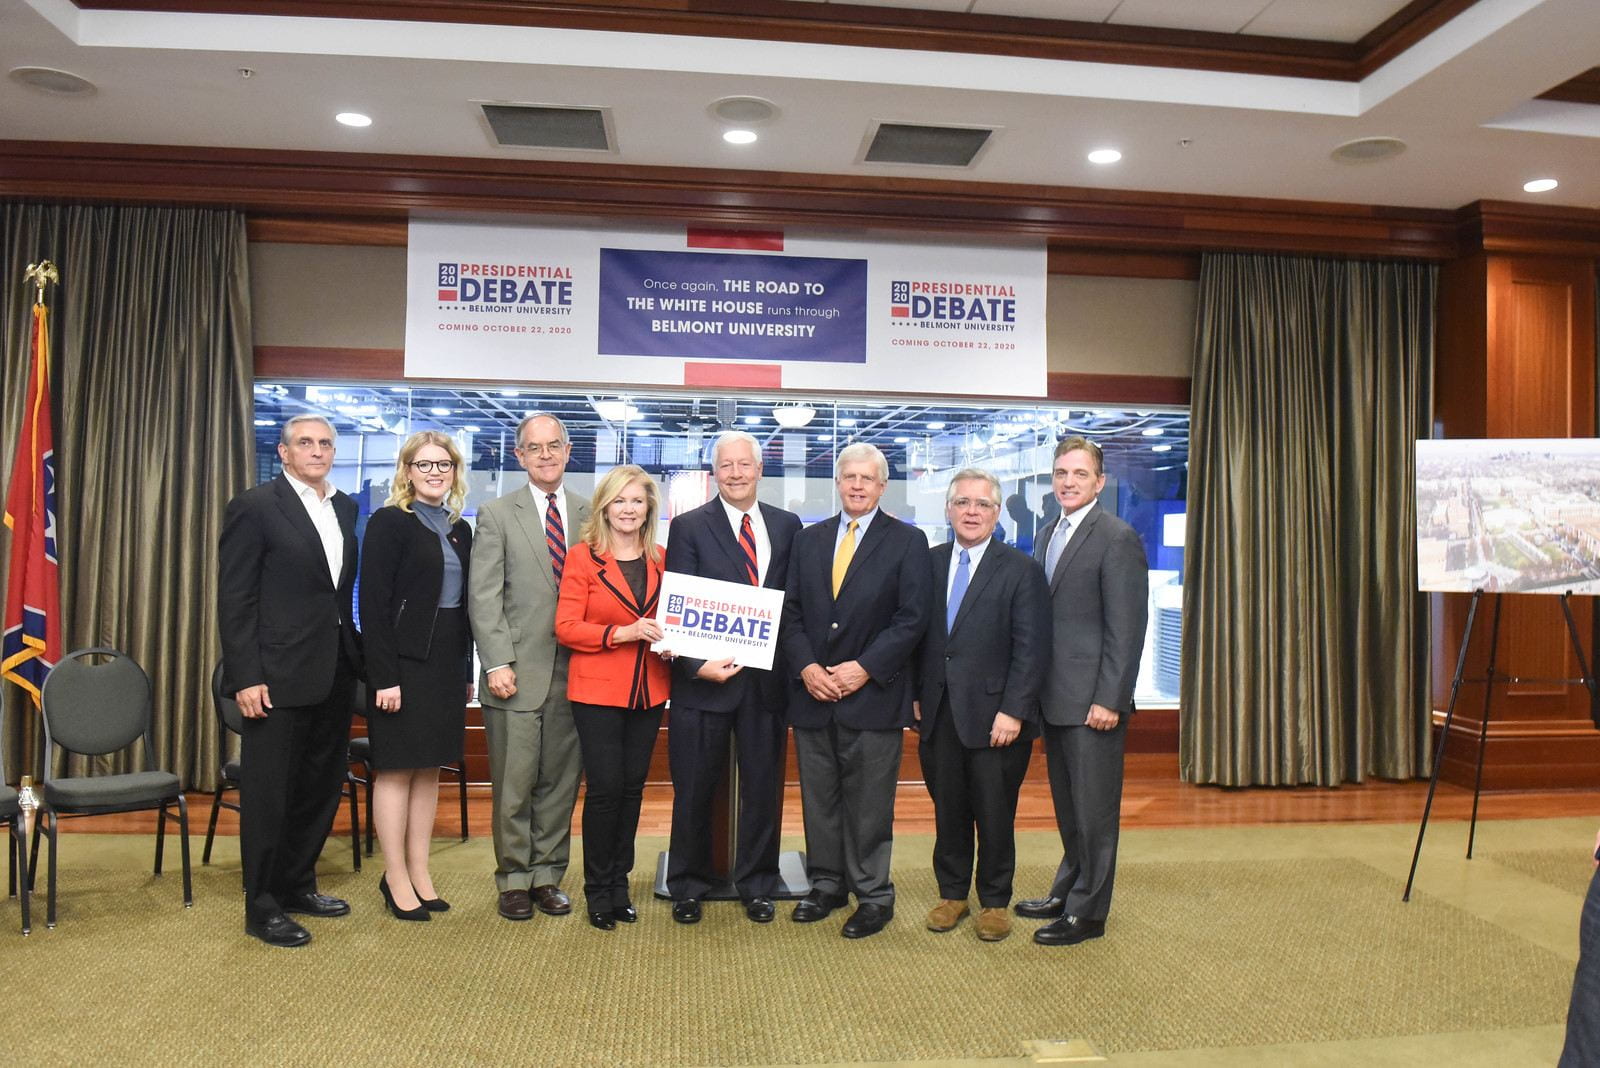 Mary Dickens, Bob Fisher, John Cooper, Mark Ezell, Marsha Blackburn, Butch Spryidon, and Megan Hitchcock pose for a photo at the Belmont Debate 2020 Announcement Ceremony